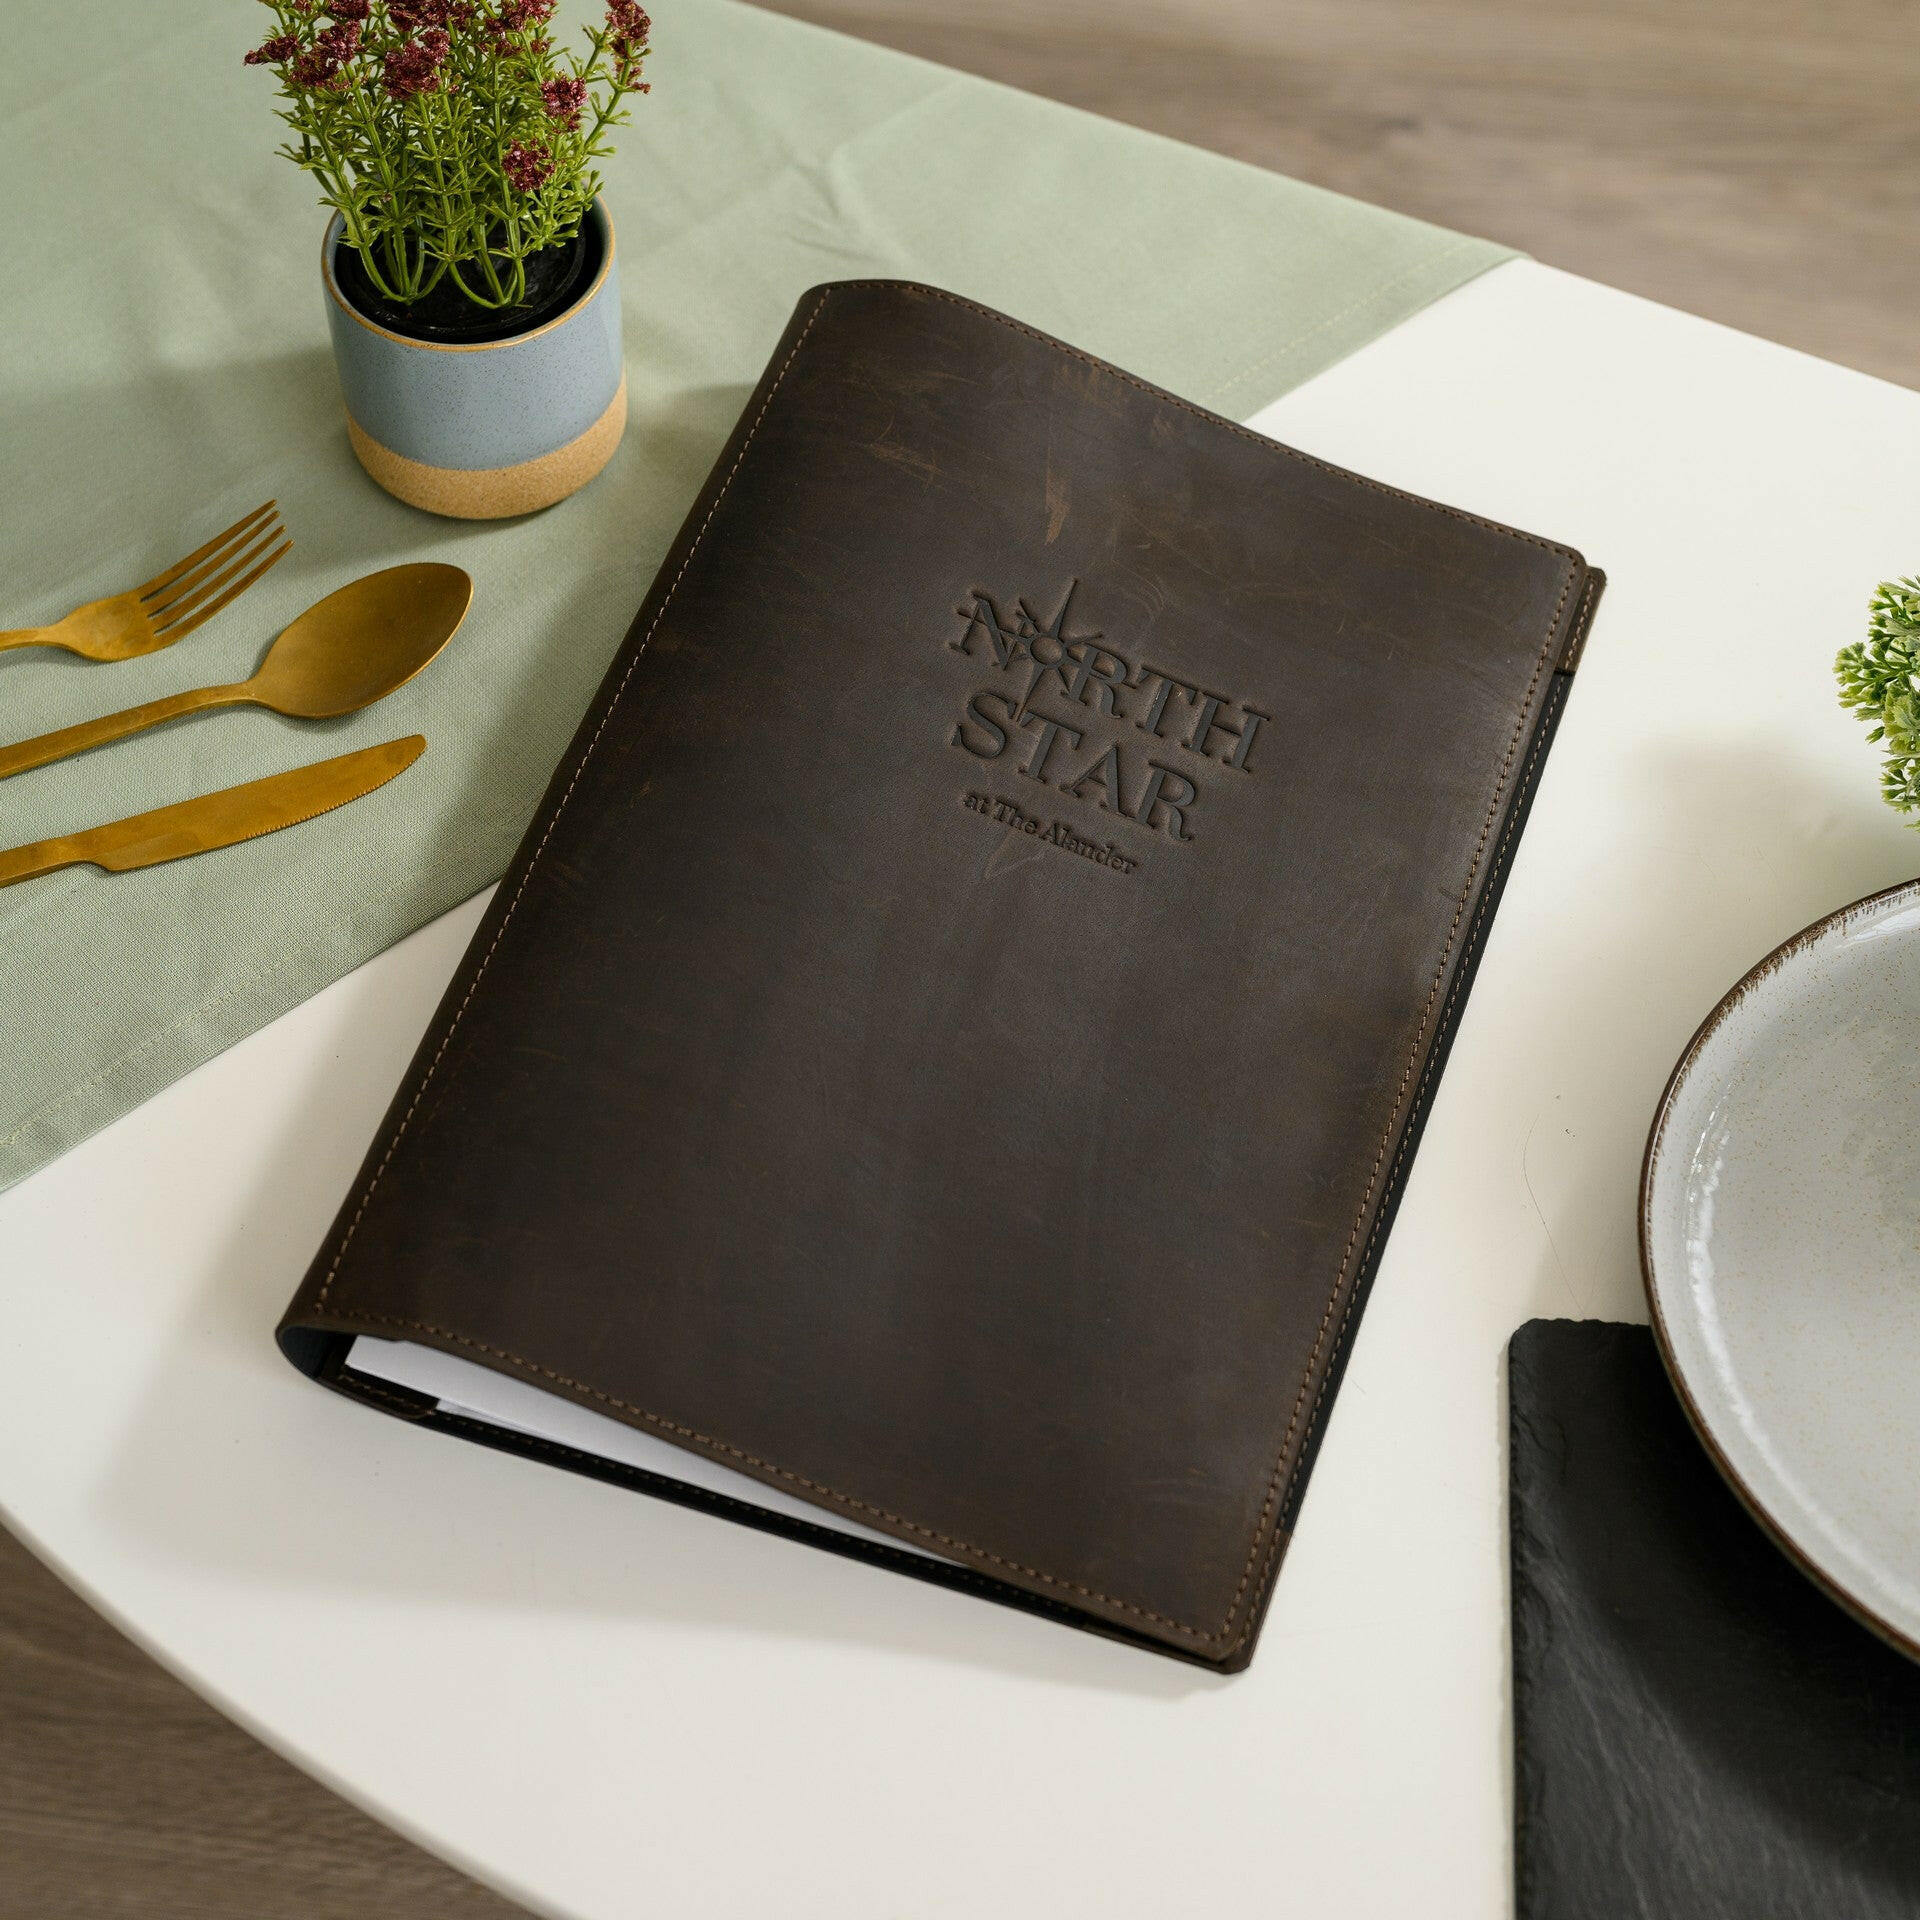  Impress with our menu case folder, featuring logo embossing for a personalized touch.